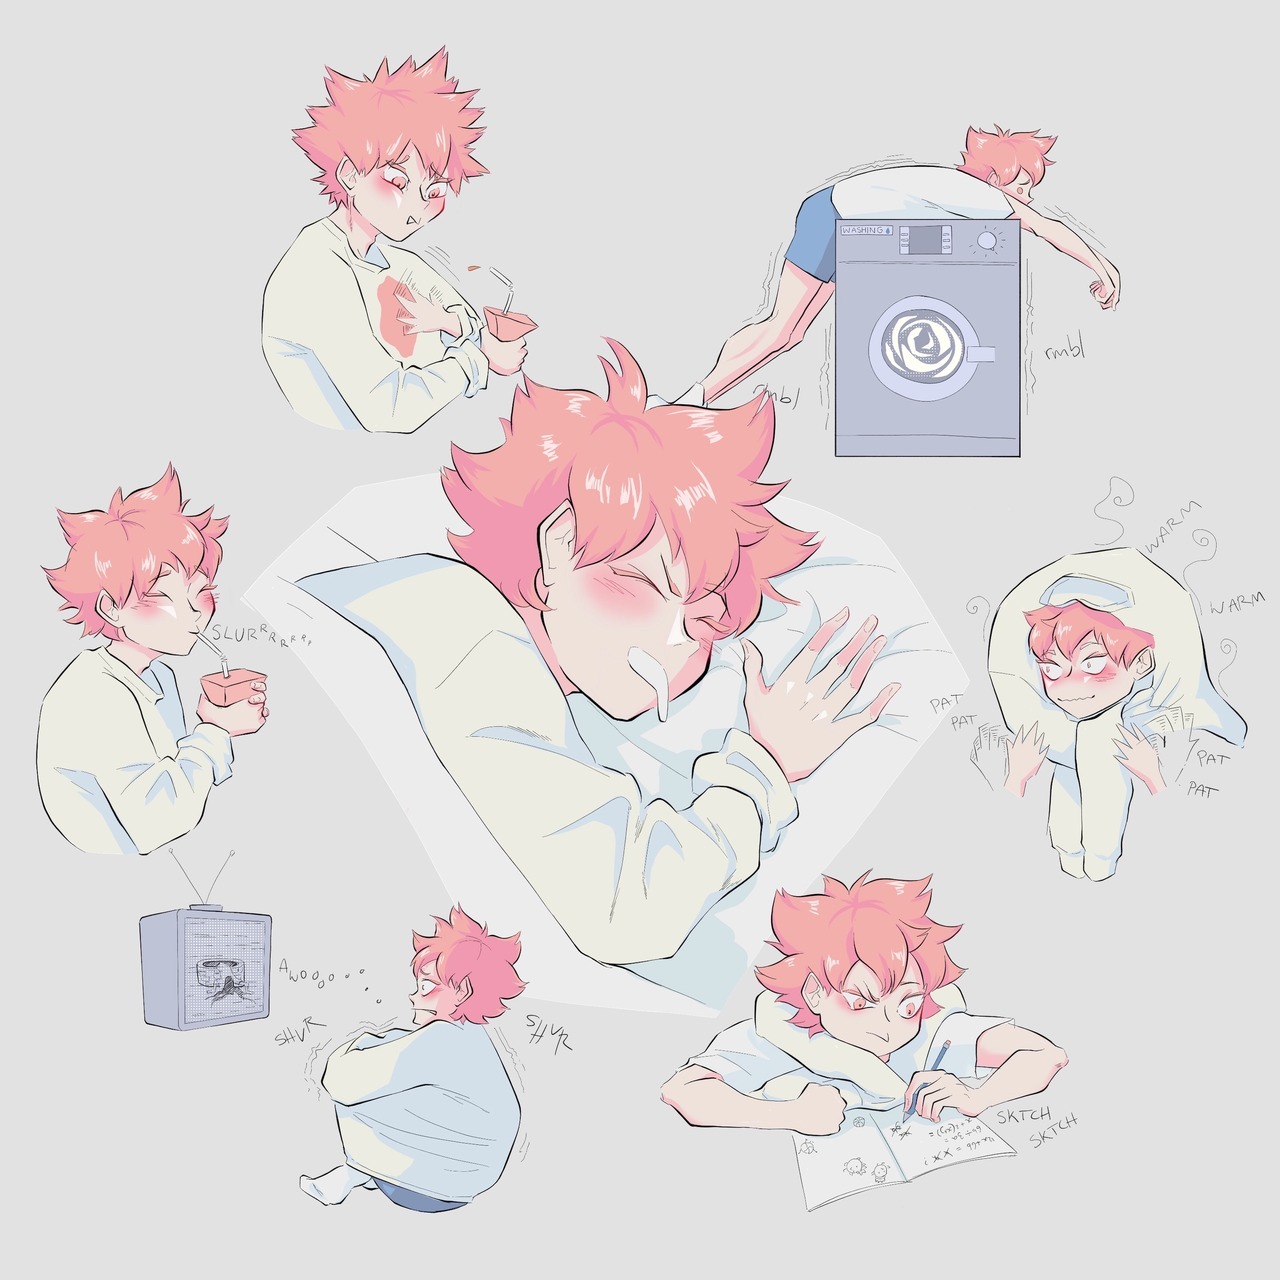 severalsmallbeans: Today’s request is for @shouyou10 who requested more of Hinata